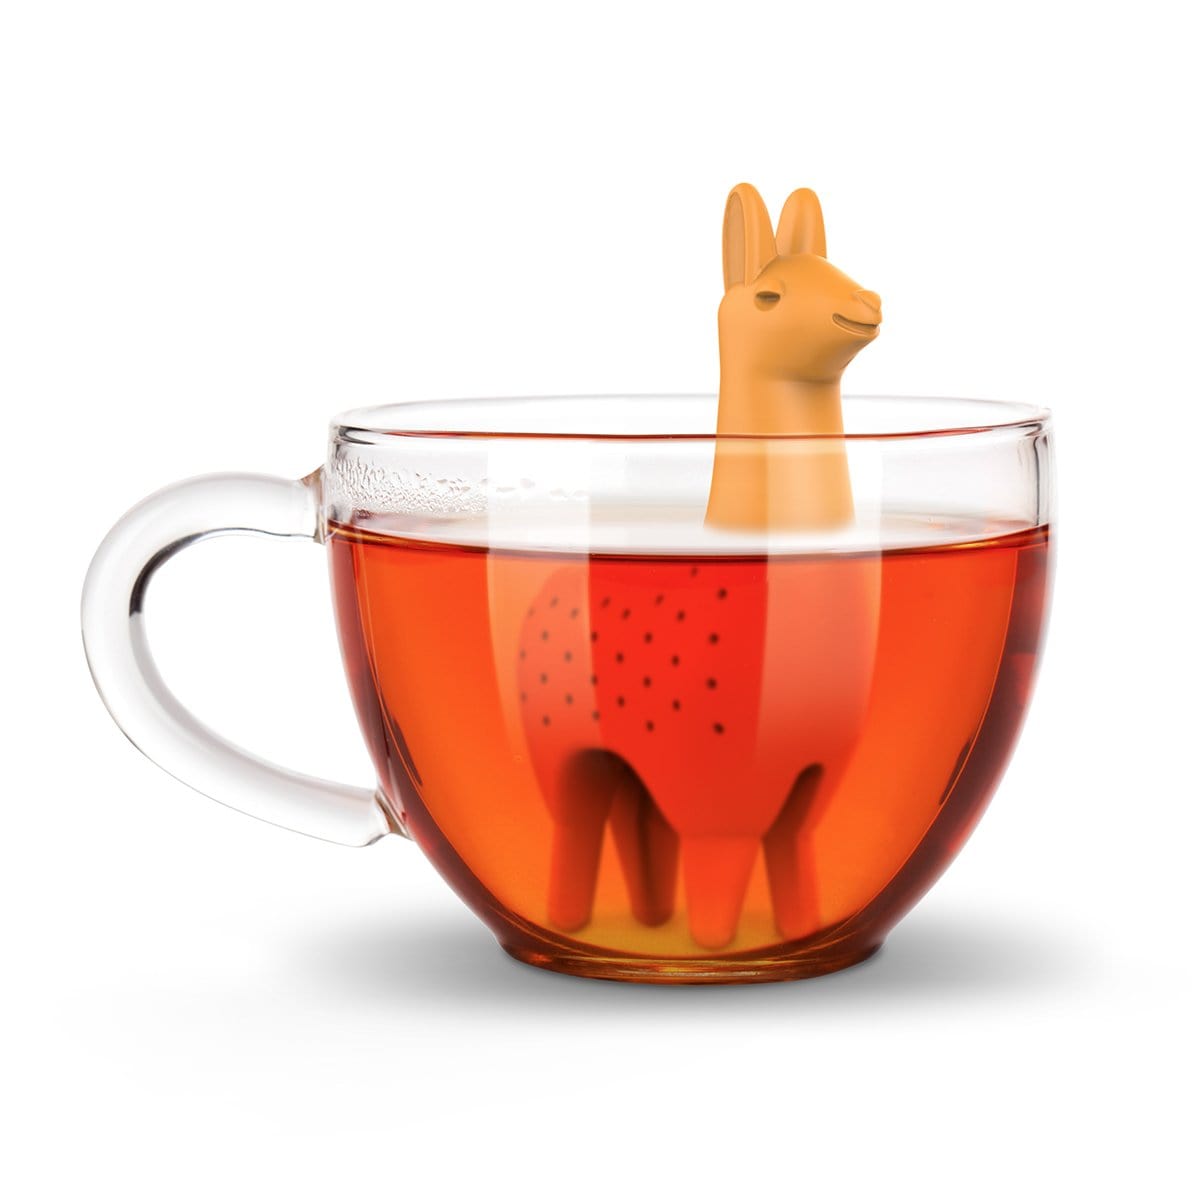 Up To 25% Off on Fred and Friends Silicone Tea